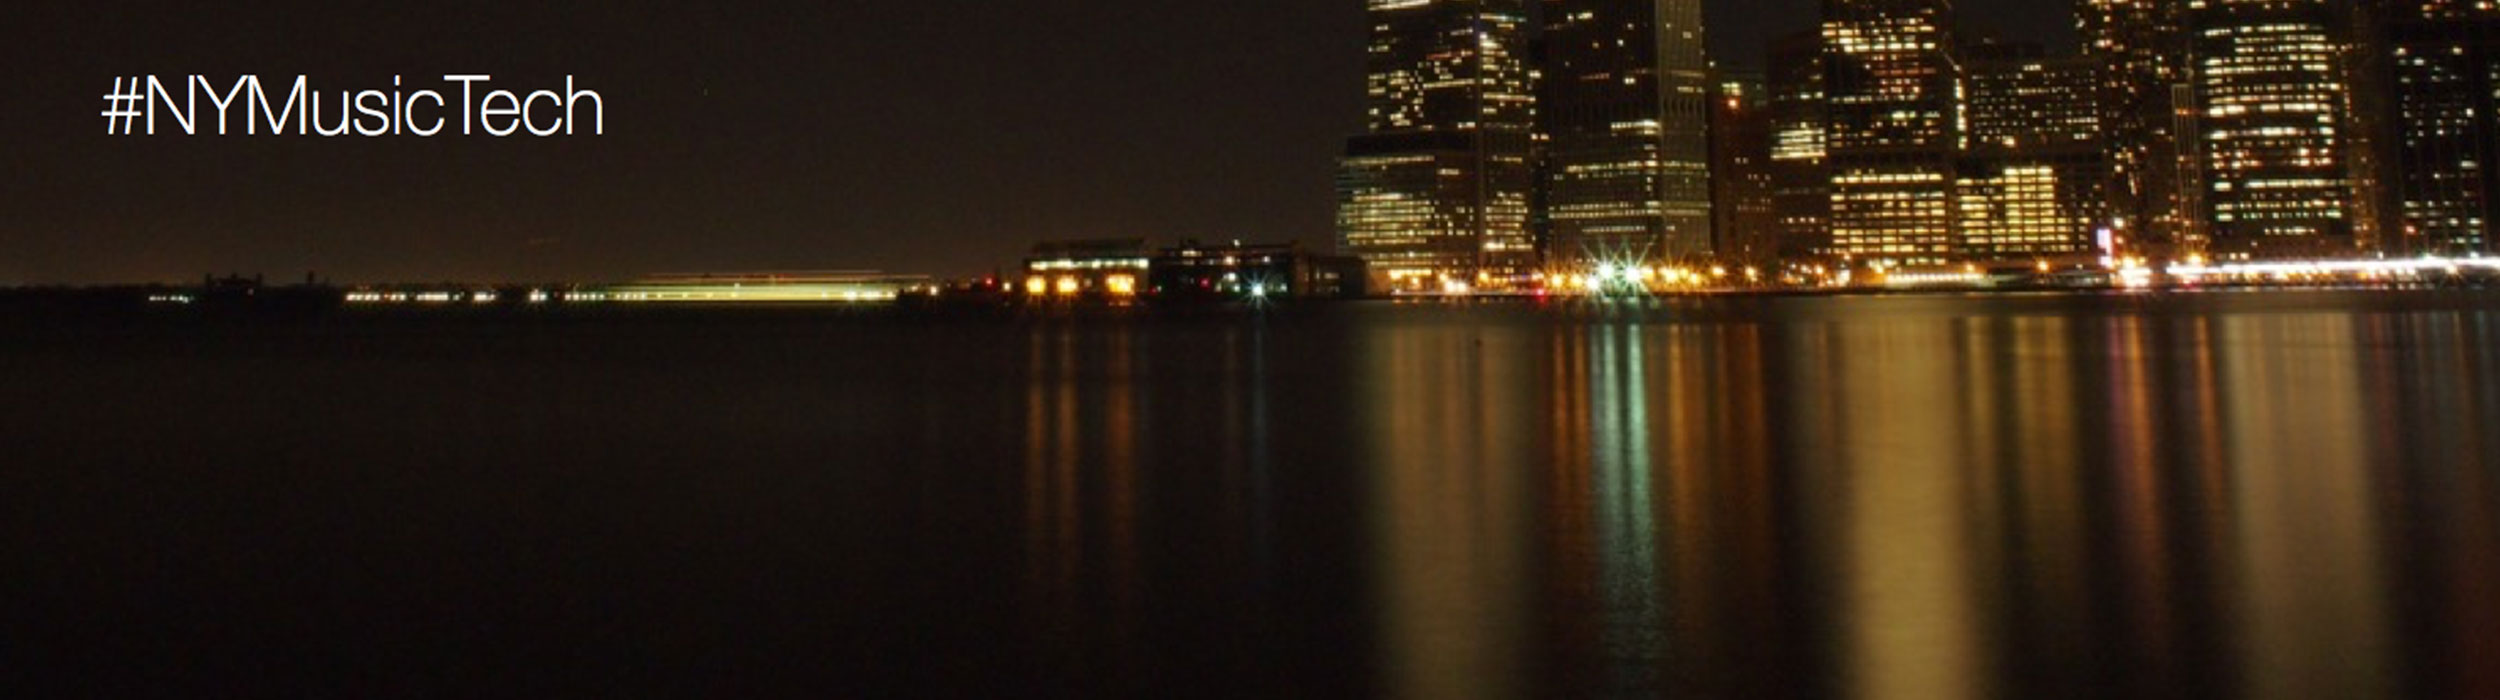 A nighttime view of New York over the Hudson river with the #NYMusicTech hasthatg.